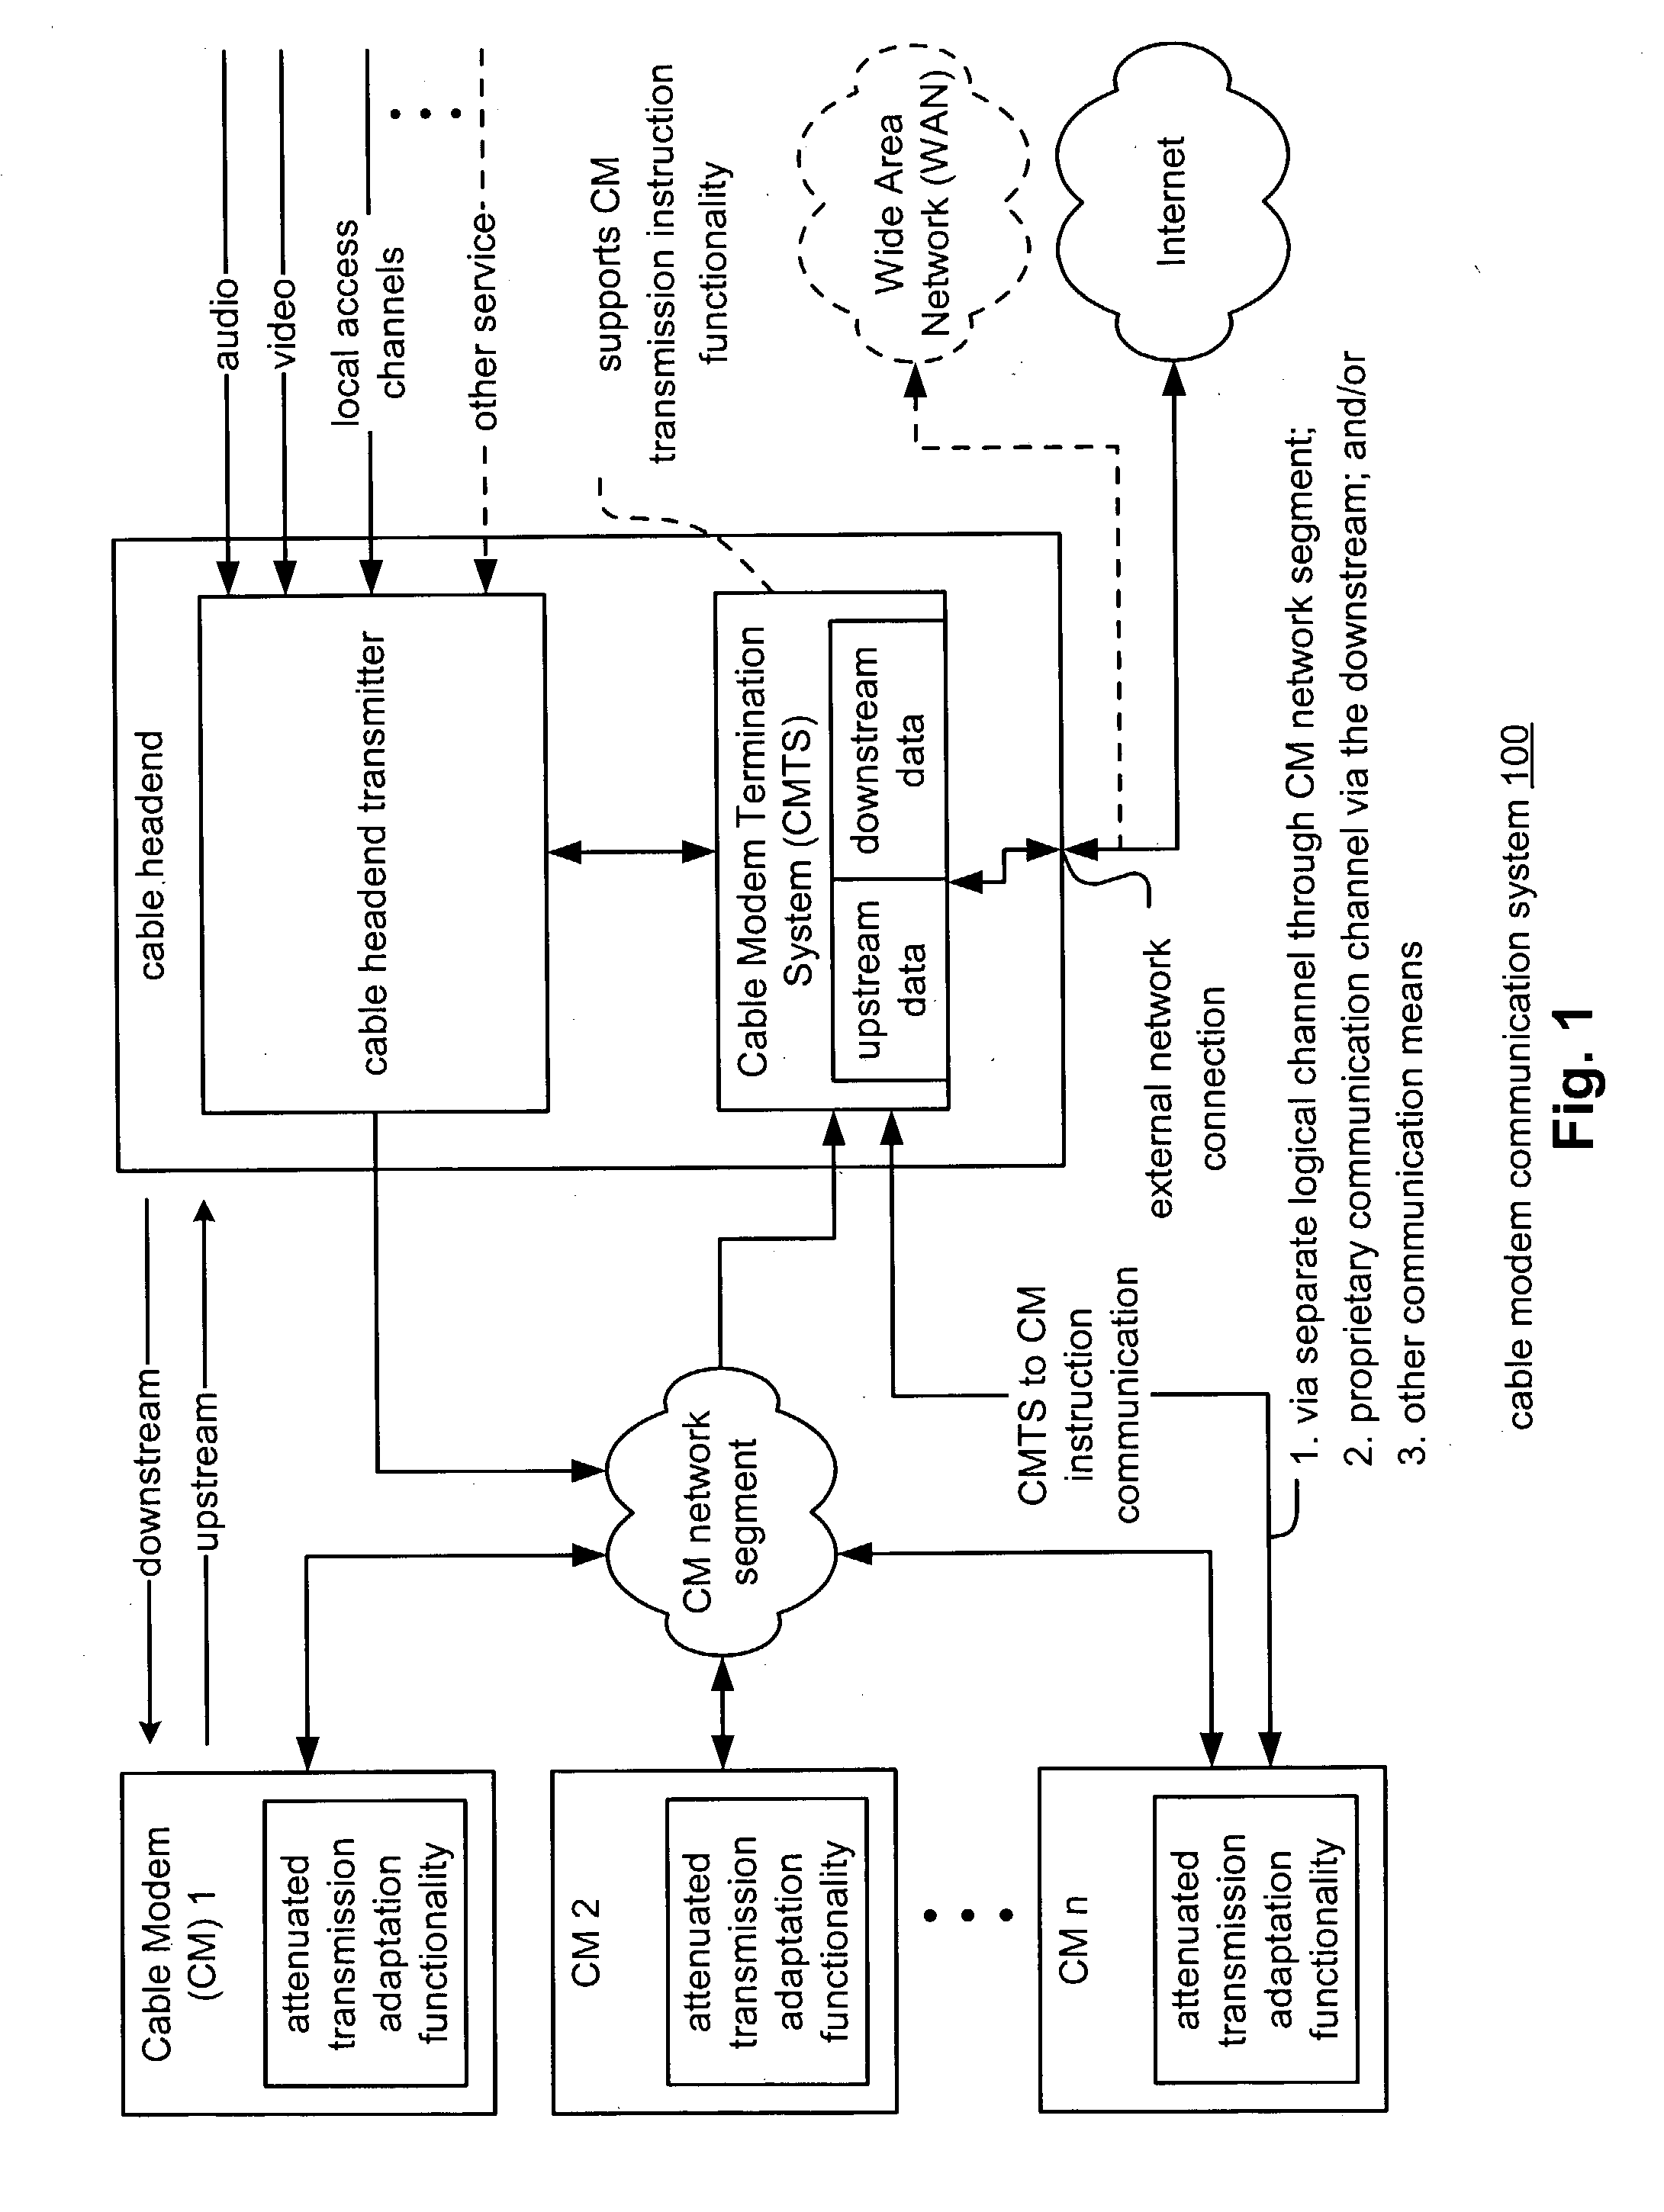 Signal processing under attenuated transmission conditions